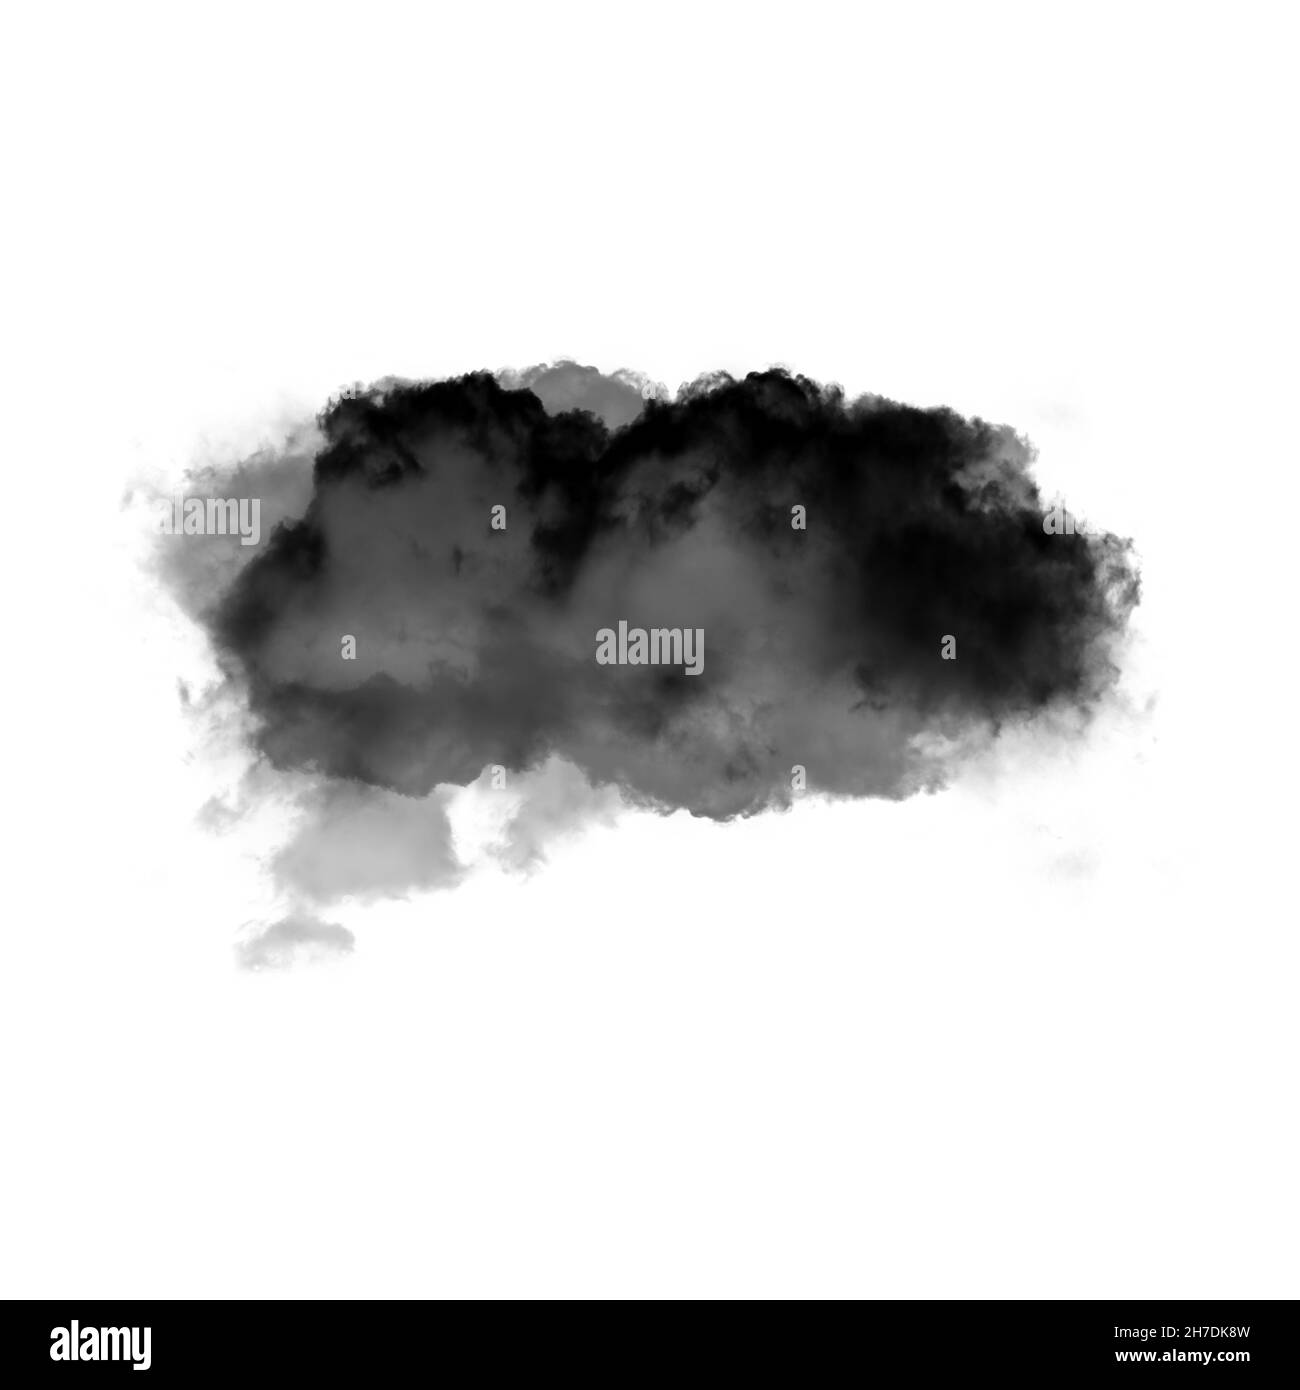 Black cloud of smoke isolated over white background 3D illustration, dirt or dust shape, natural smoke from fire Stock Photo